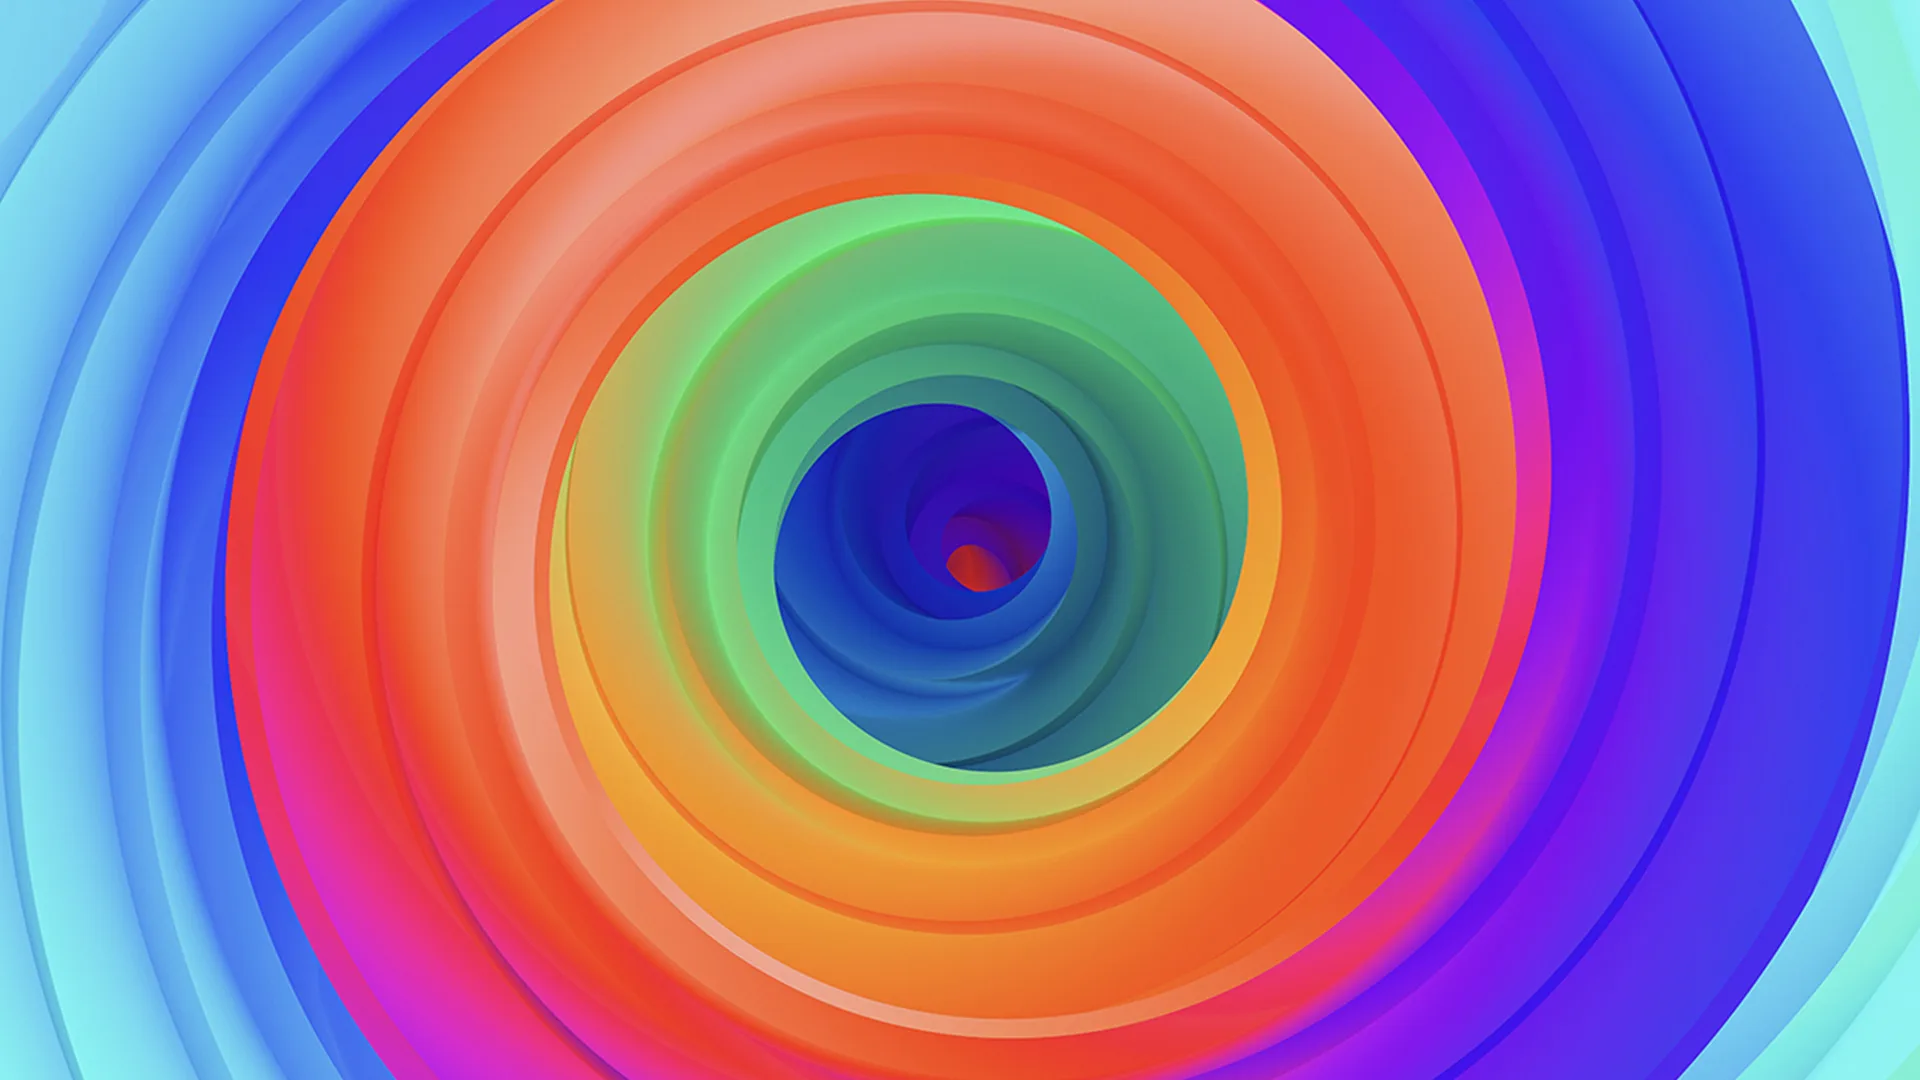 Spiral of colours